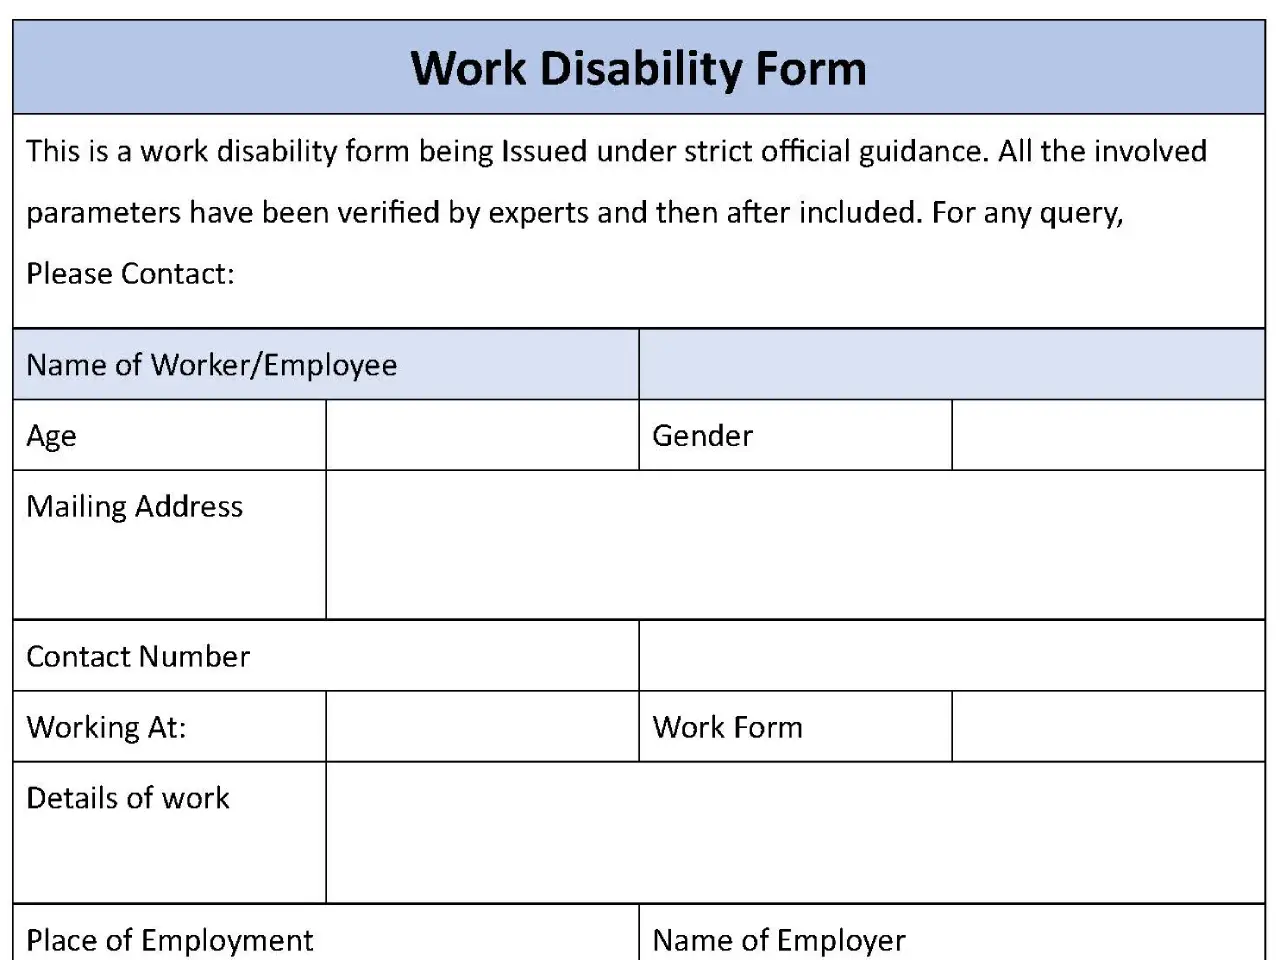 Work Disability Form